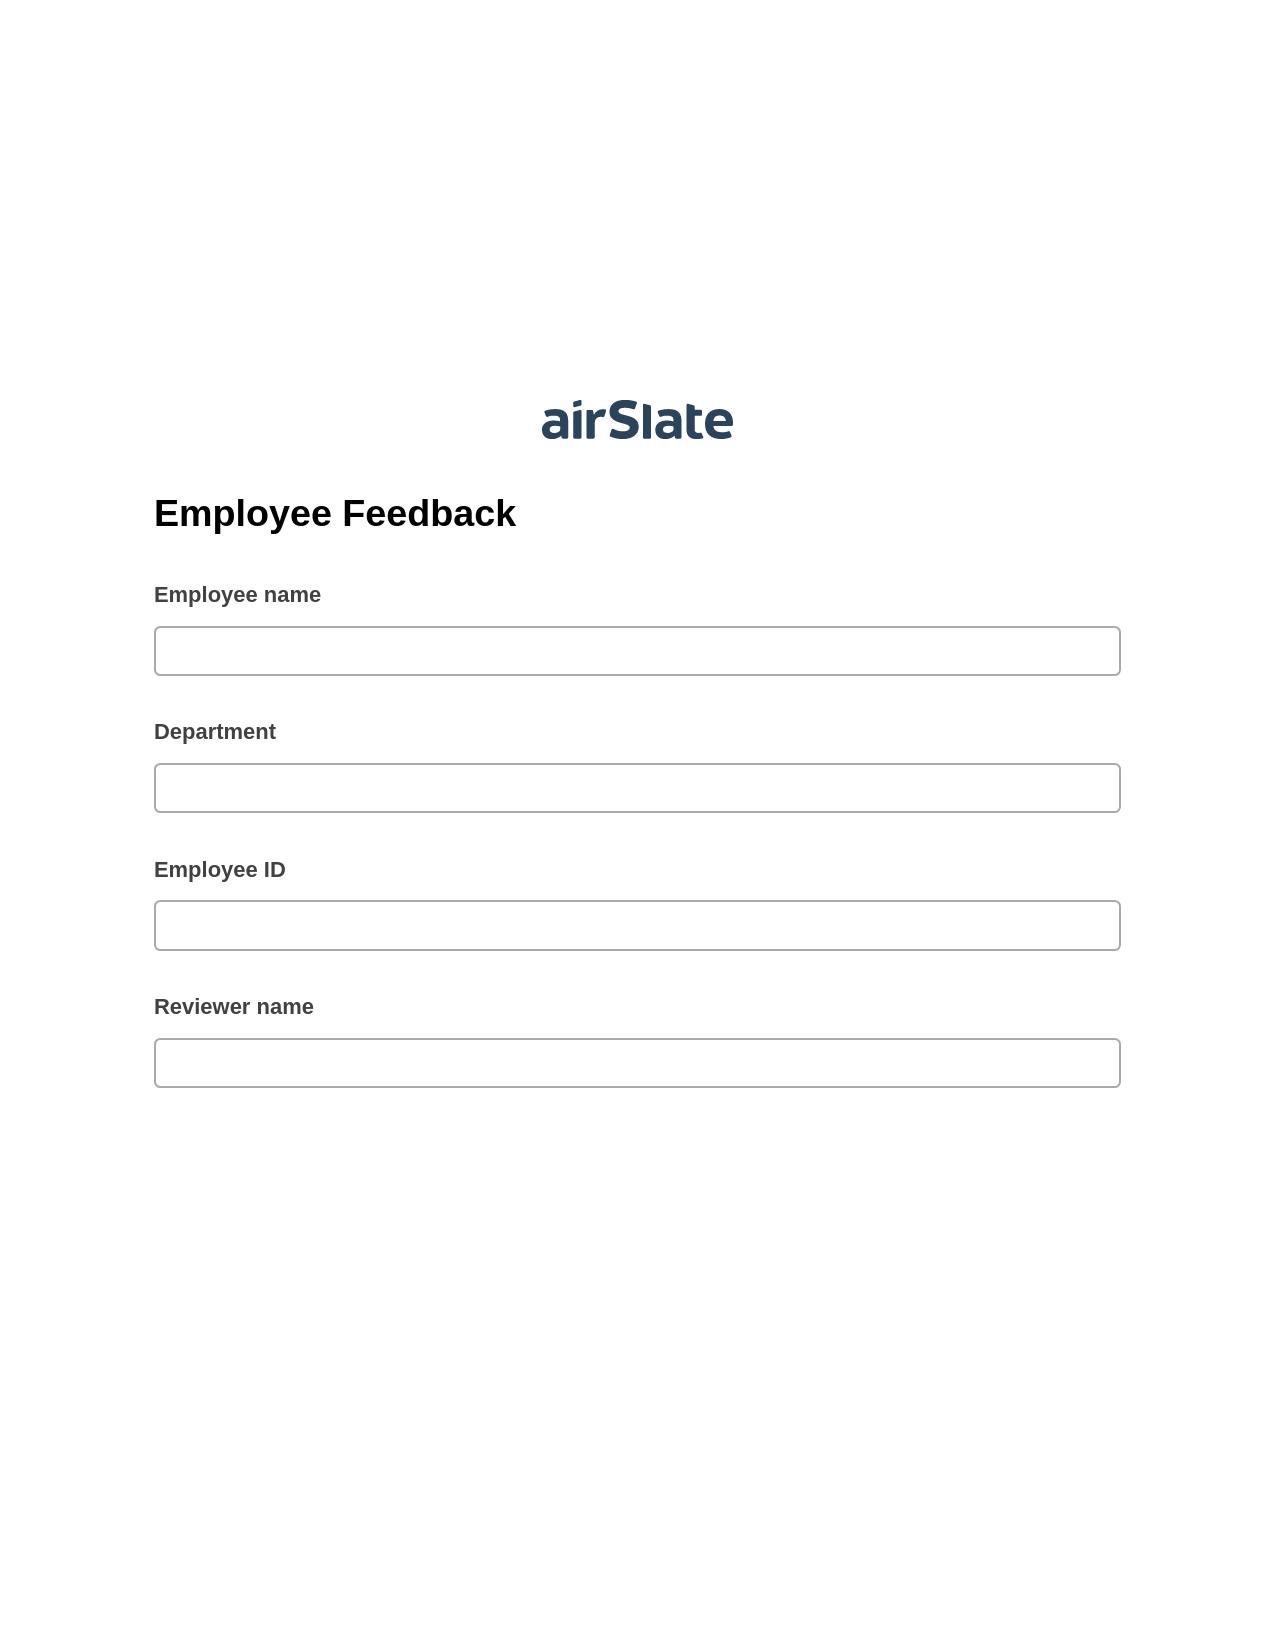 Employee Feedback Pre-fill Slate from MS Dynamics 365 Records Bot, Mailchimp send Campaign bot, Export to Excel 365 Bot